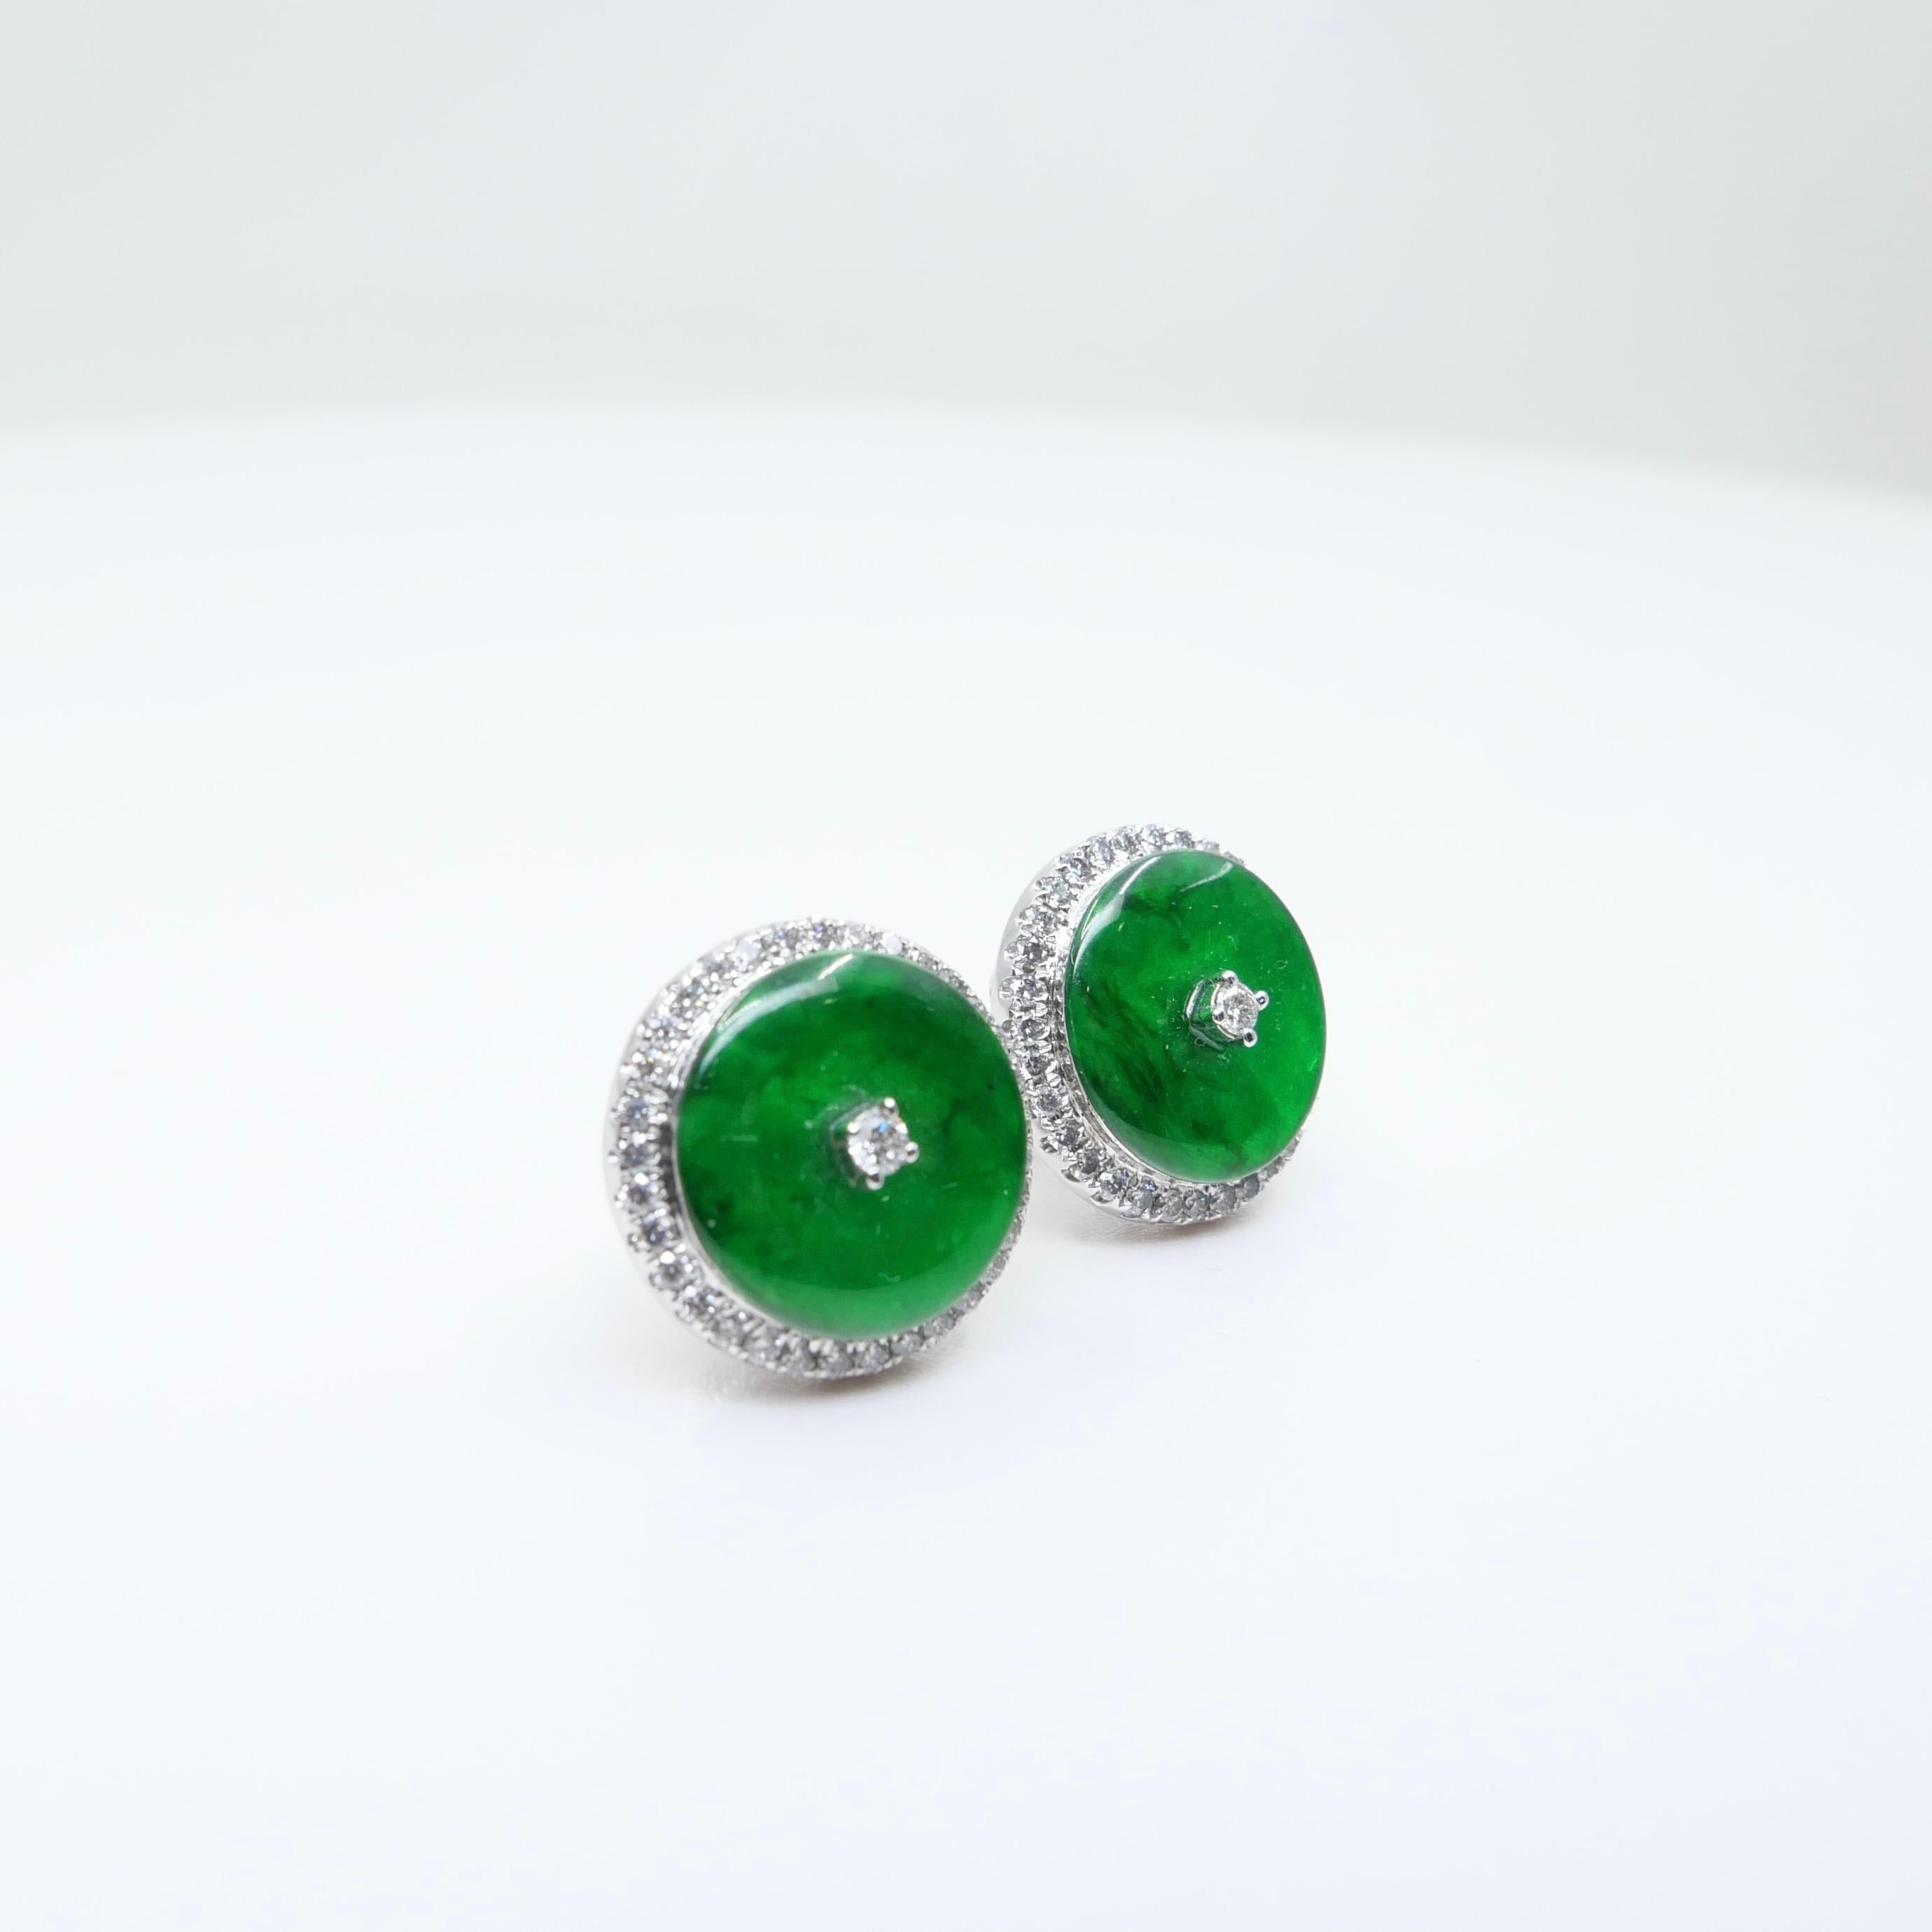 Certified Natural Type A Jadeite Jade And Diamond Earrings. Apple Green Color 9